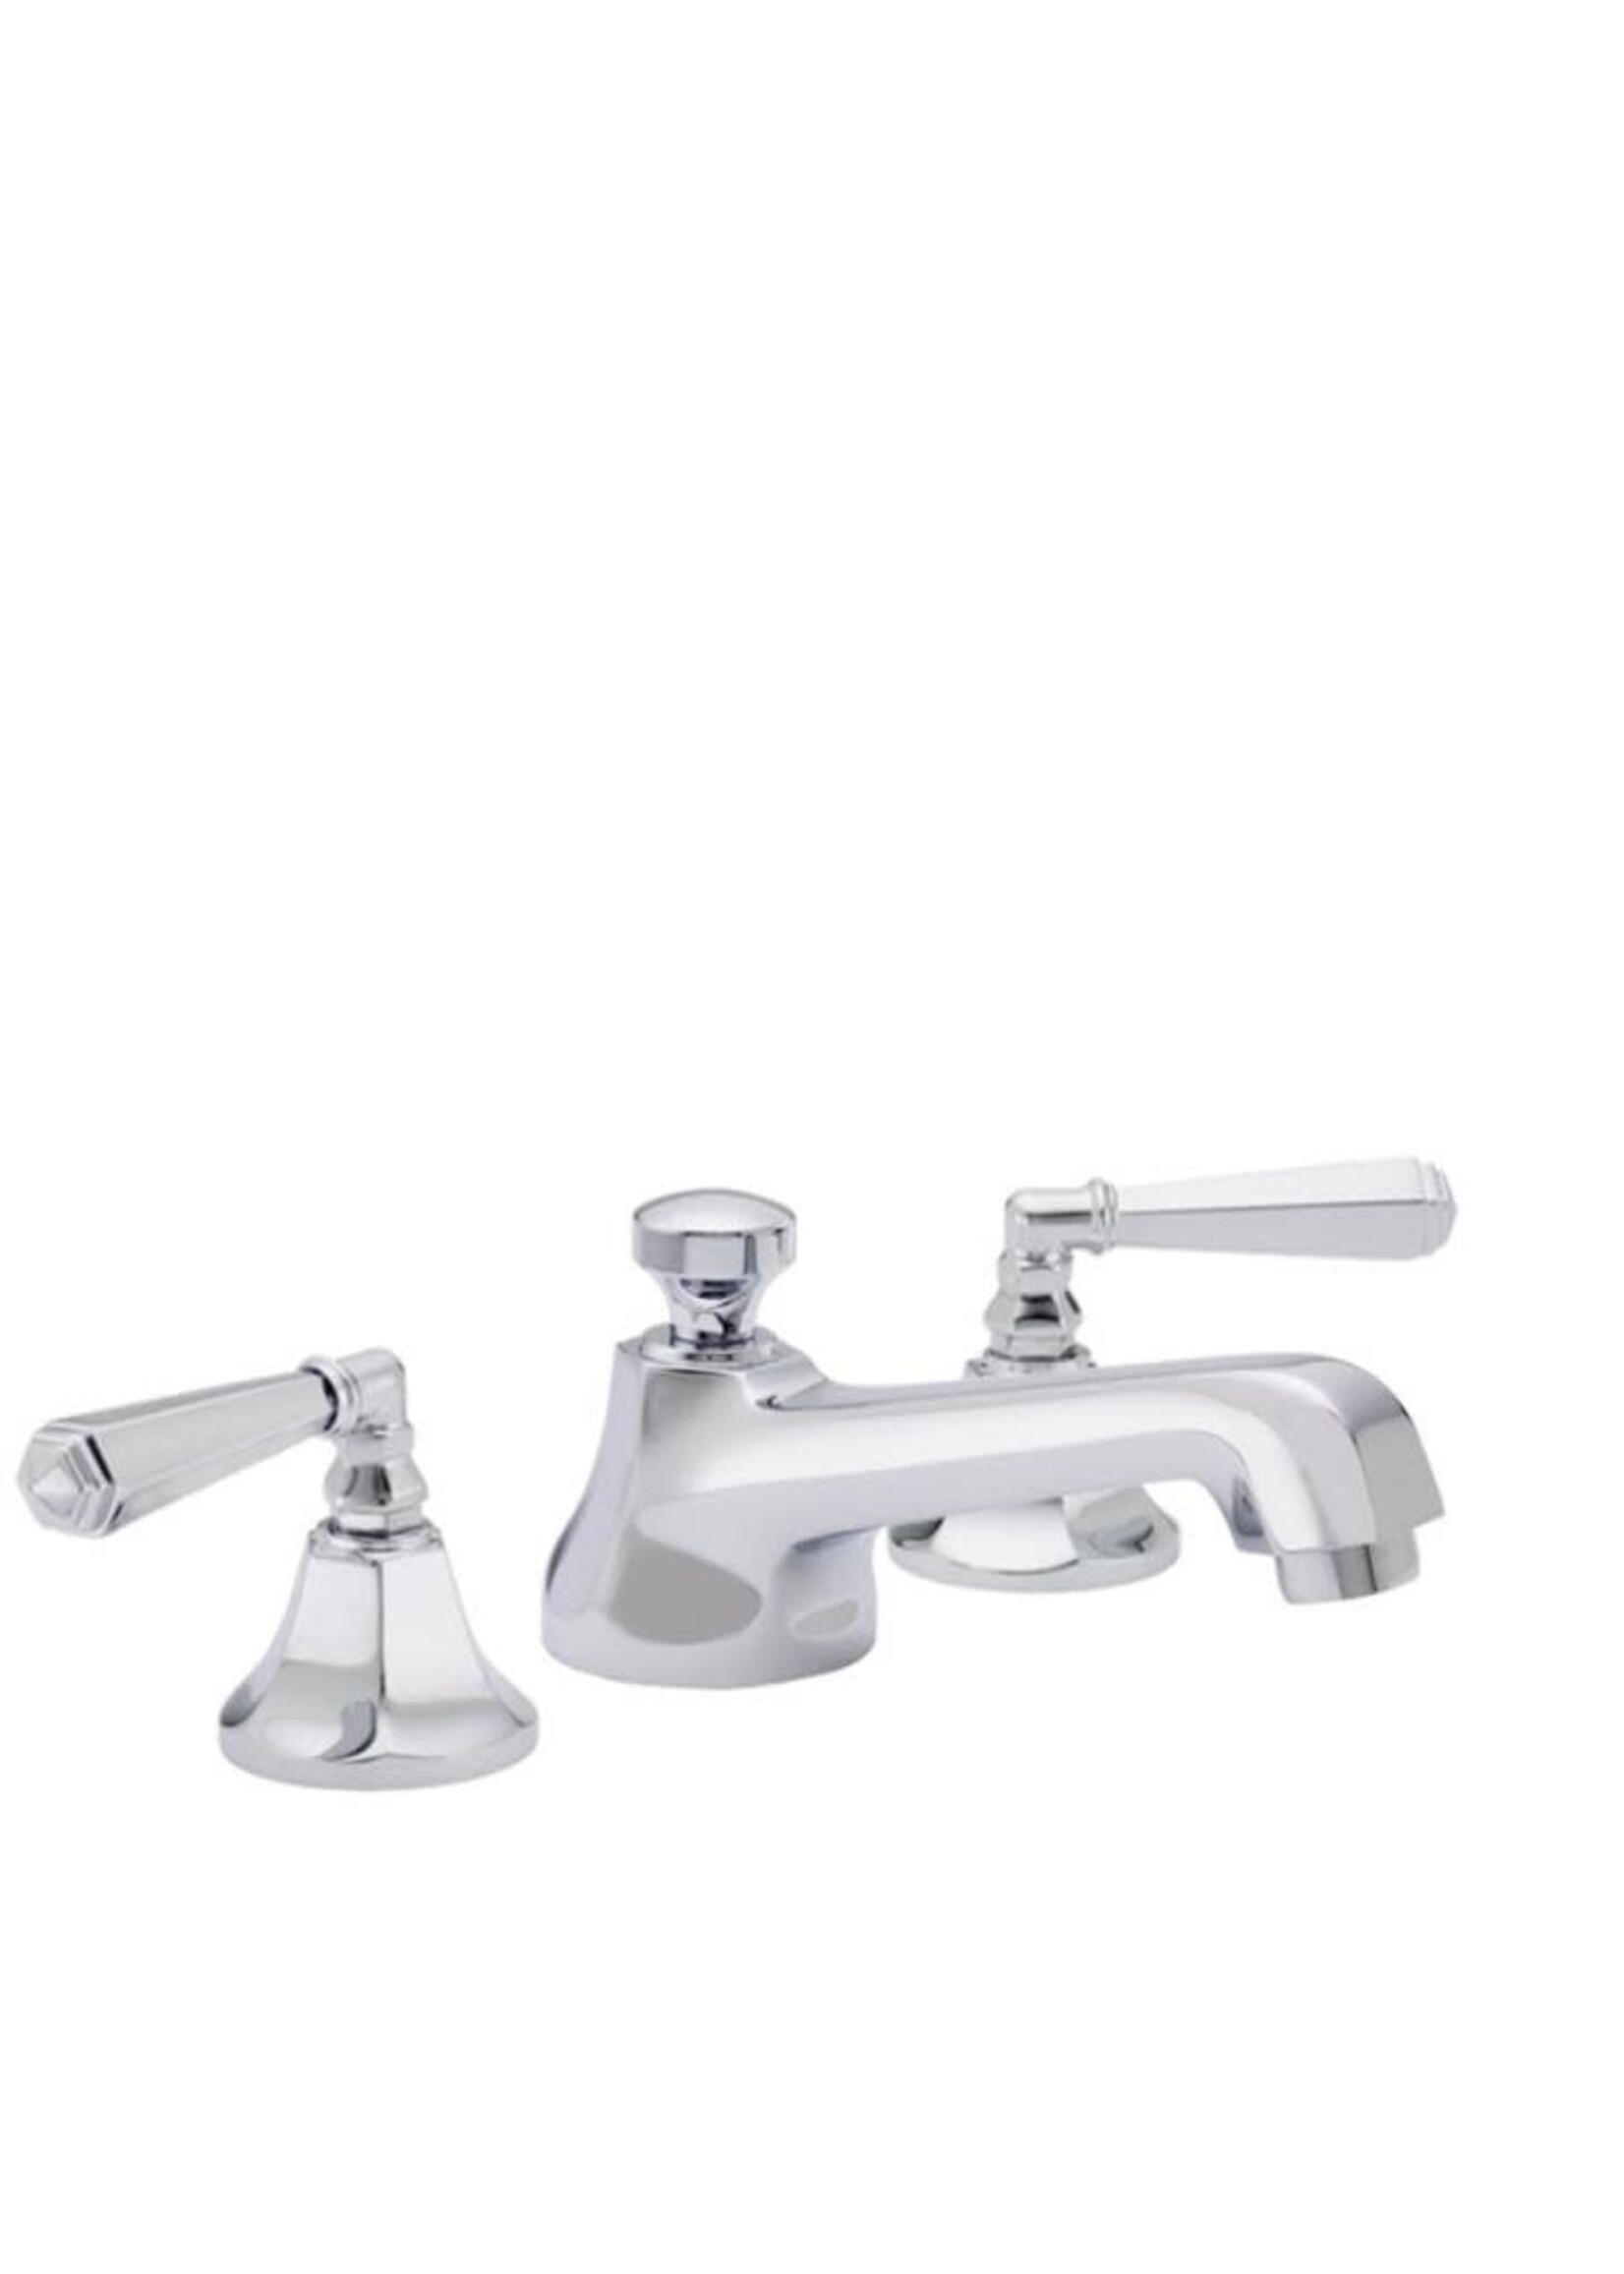 California Faucets California Faucets Monterey 8" Widespread Lavatory Faucet Lever Handles